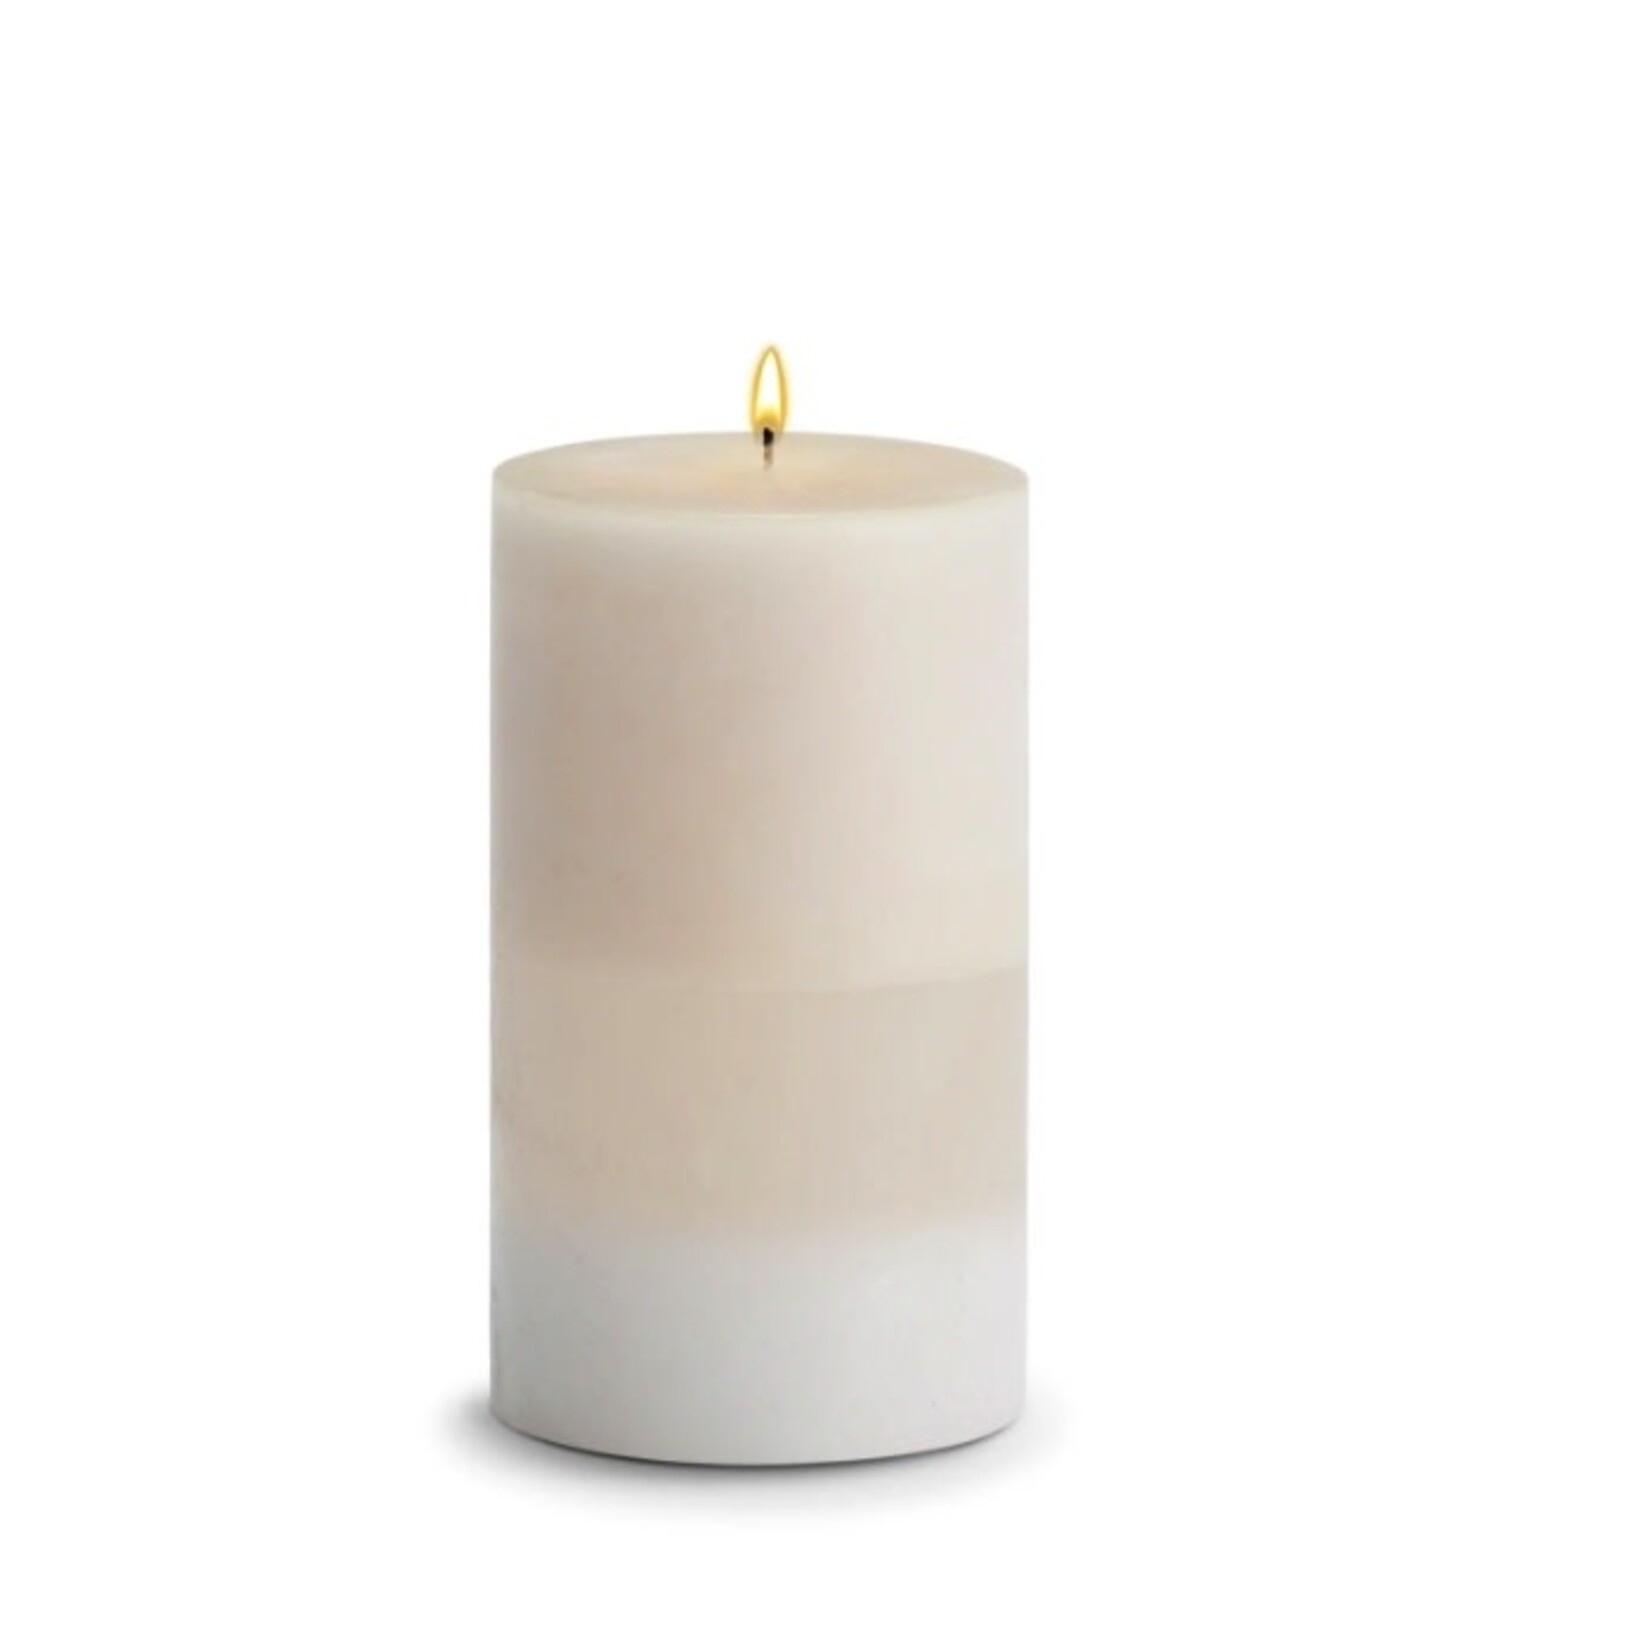 STONE CANDLES STONE PILLAR CANDLE 4X8 AMBER ROSE